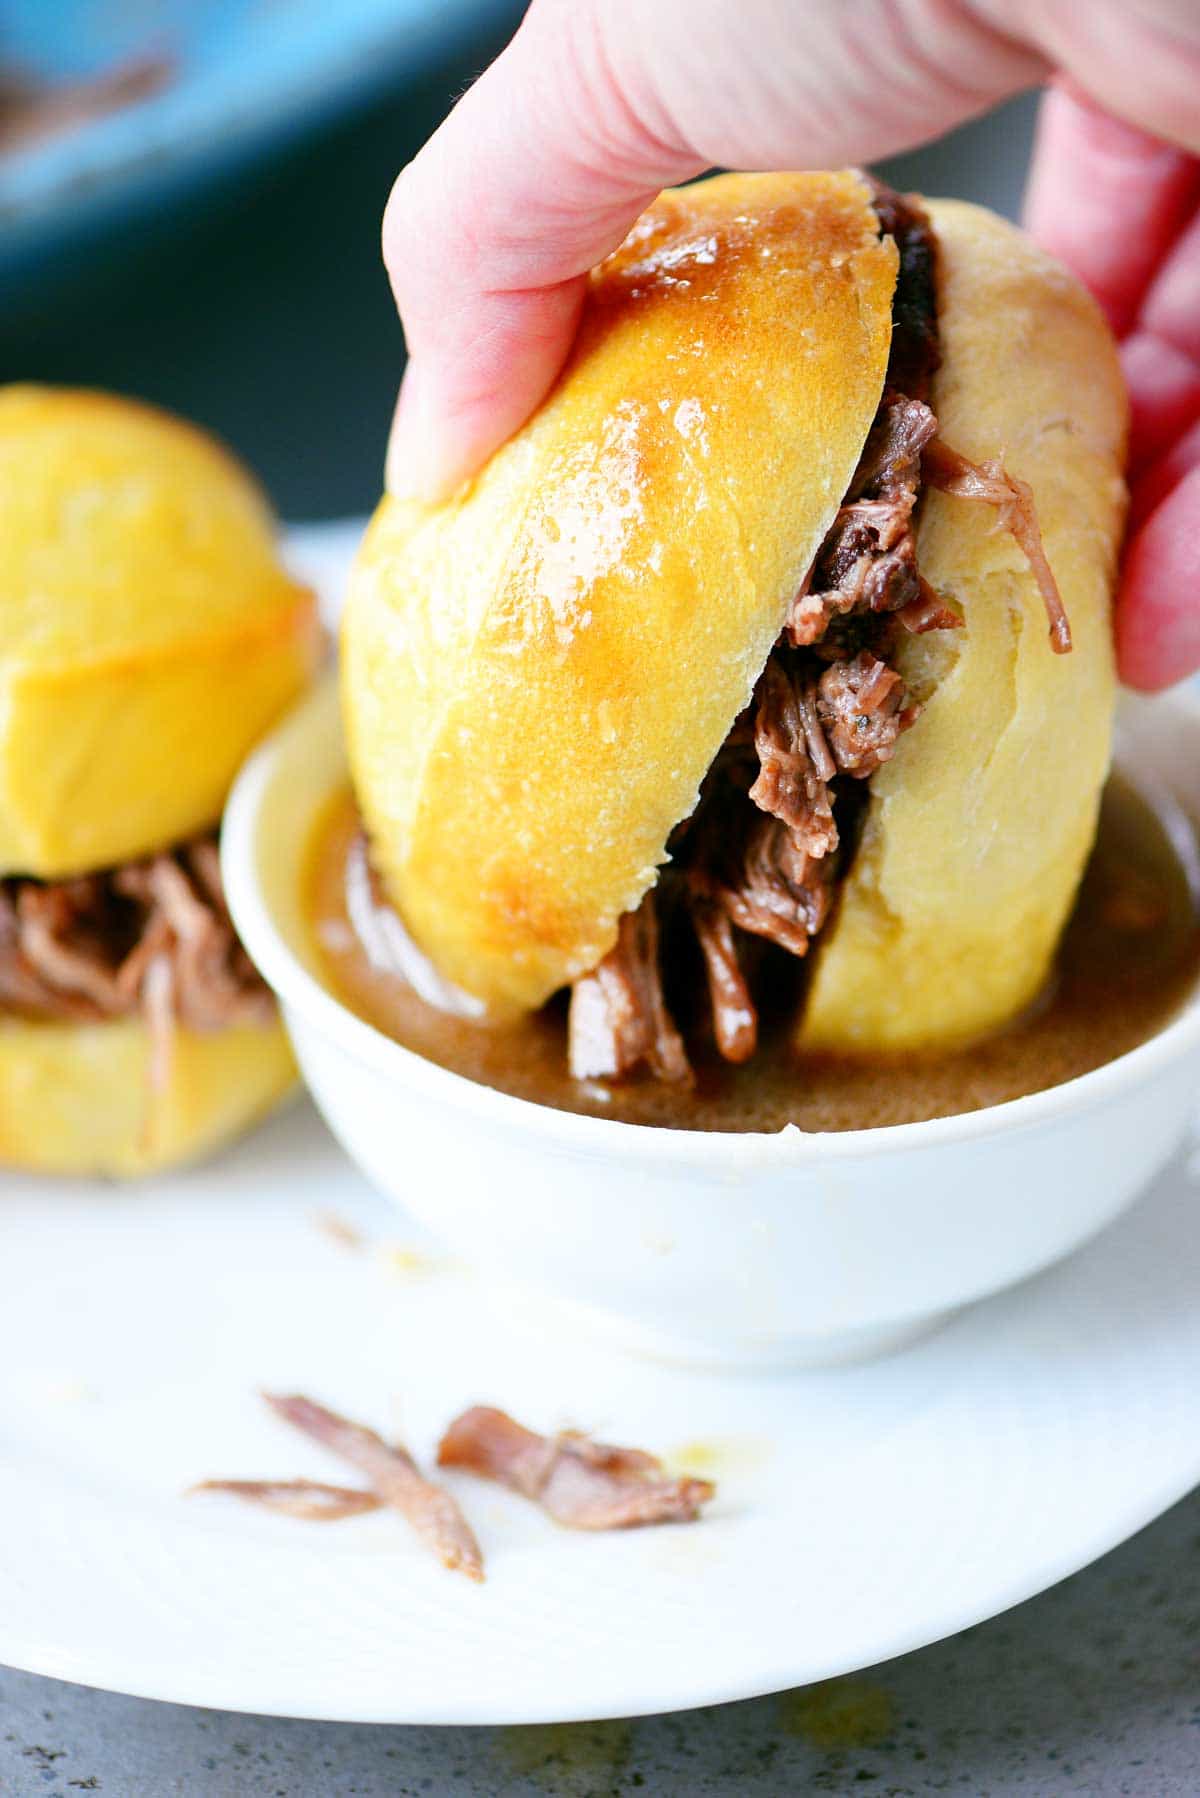 Dipping Sandwiches In Au Jus